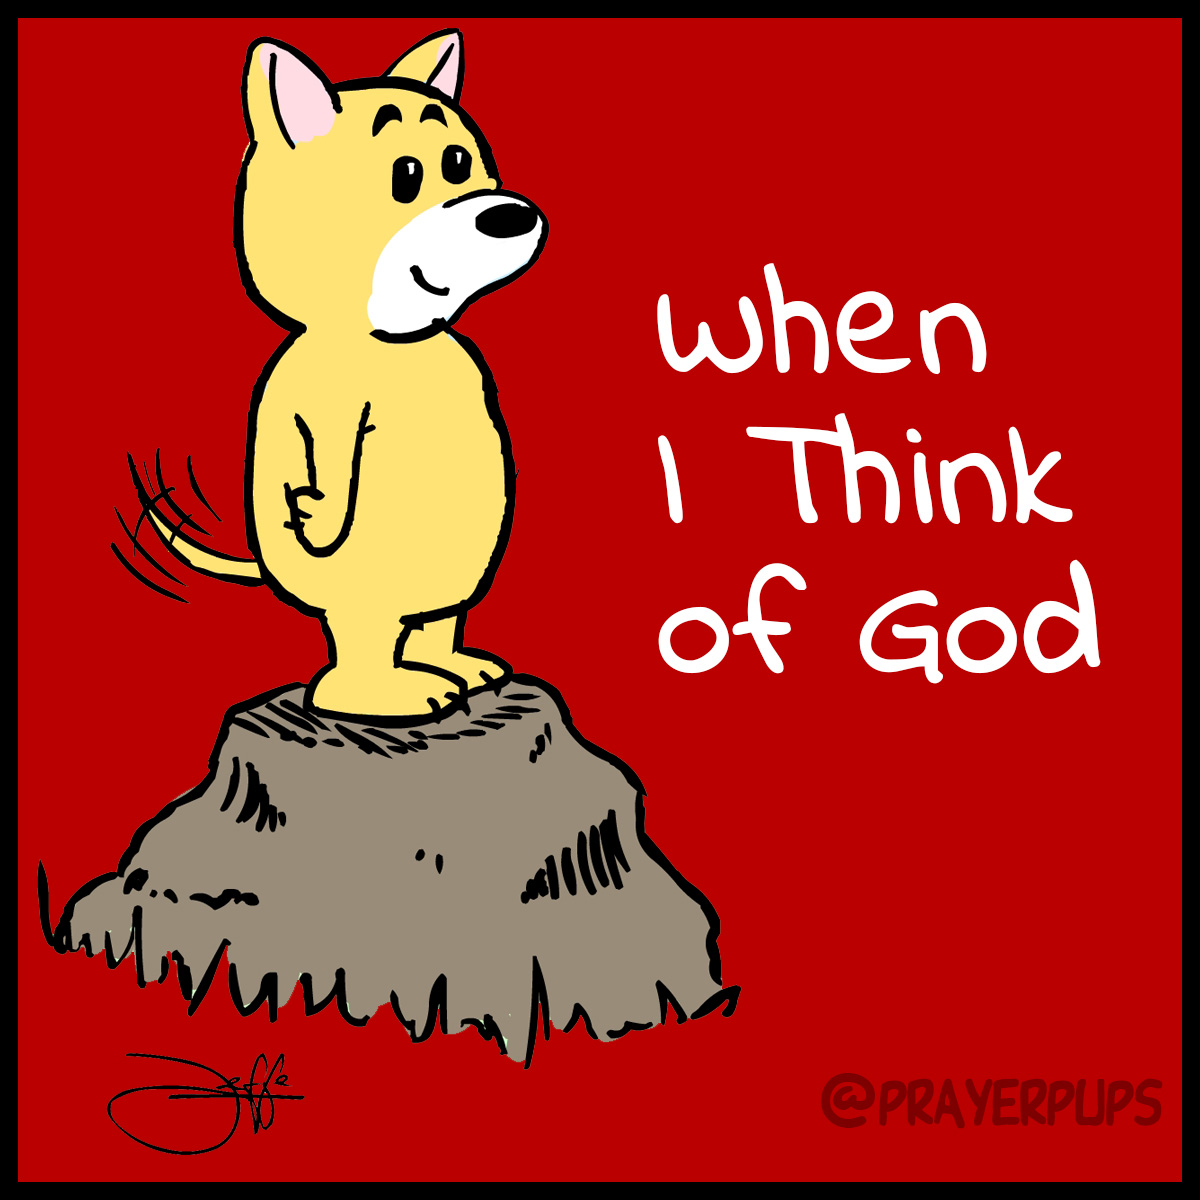 When I think of God